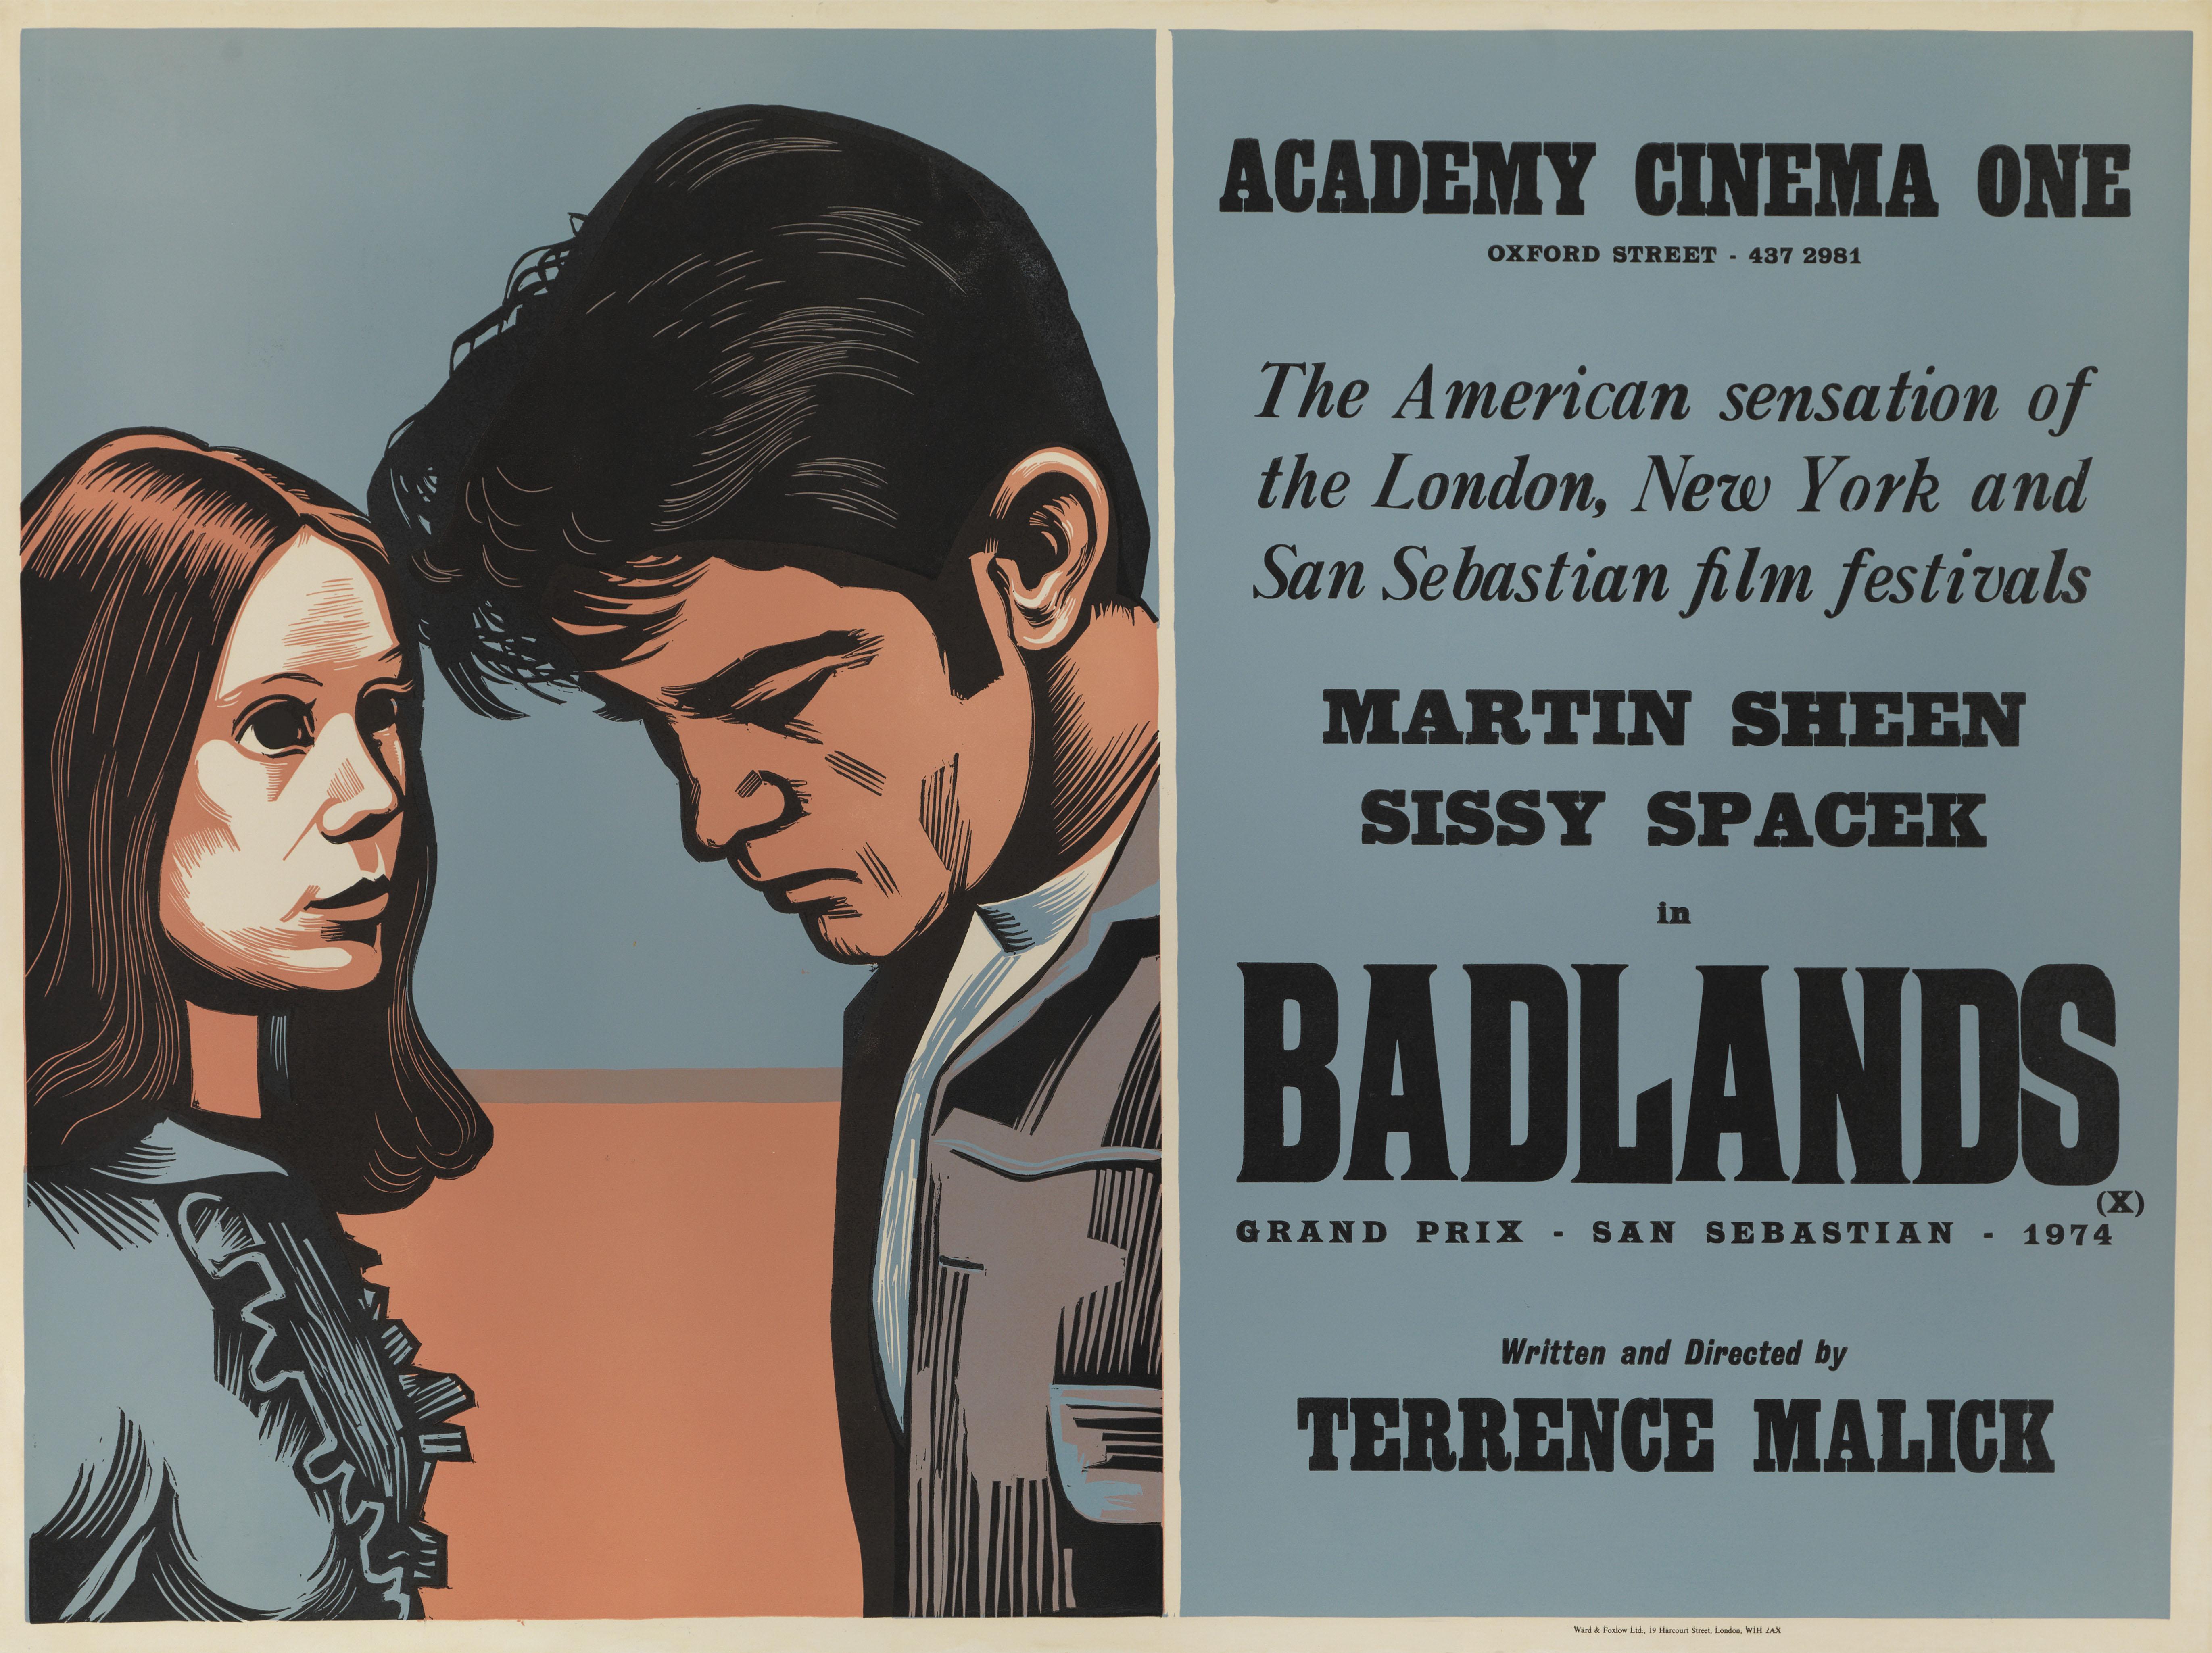 Original British film poster for the Badlands 1974.
This film was directed by Terrence Malick and starred Martin Sheen, Sissy Spacek and Warren Oates.
The artwork on this poster is by Peter Strausfeld (1910-1980)
Peter Strausfeld was born in